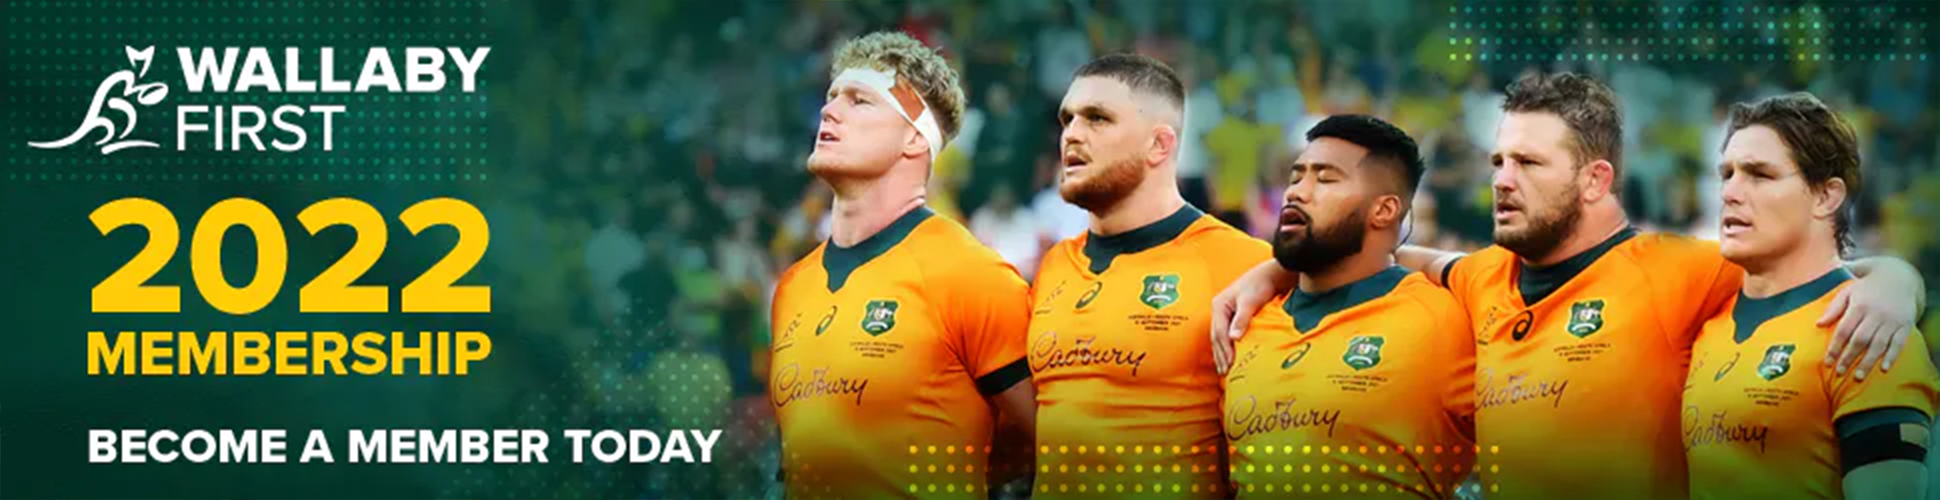 Banner promoting Wallaby First Membership